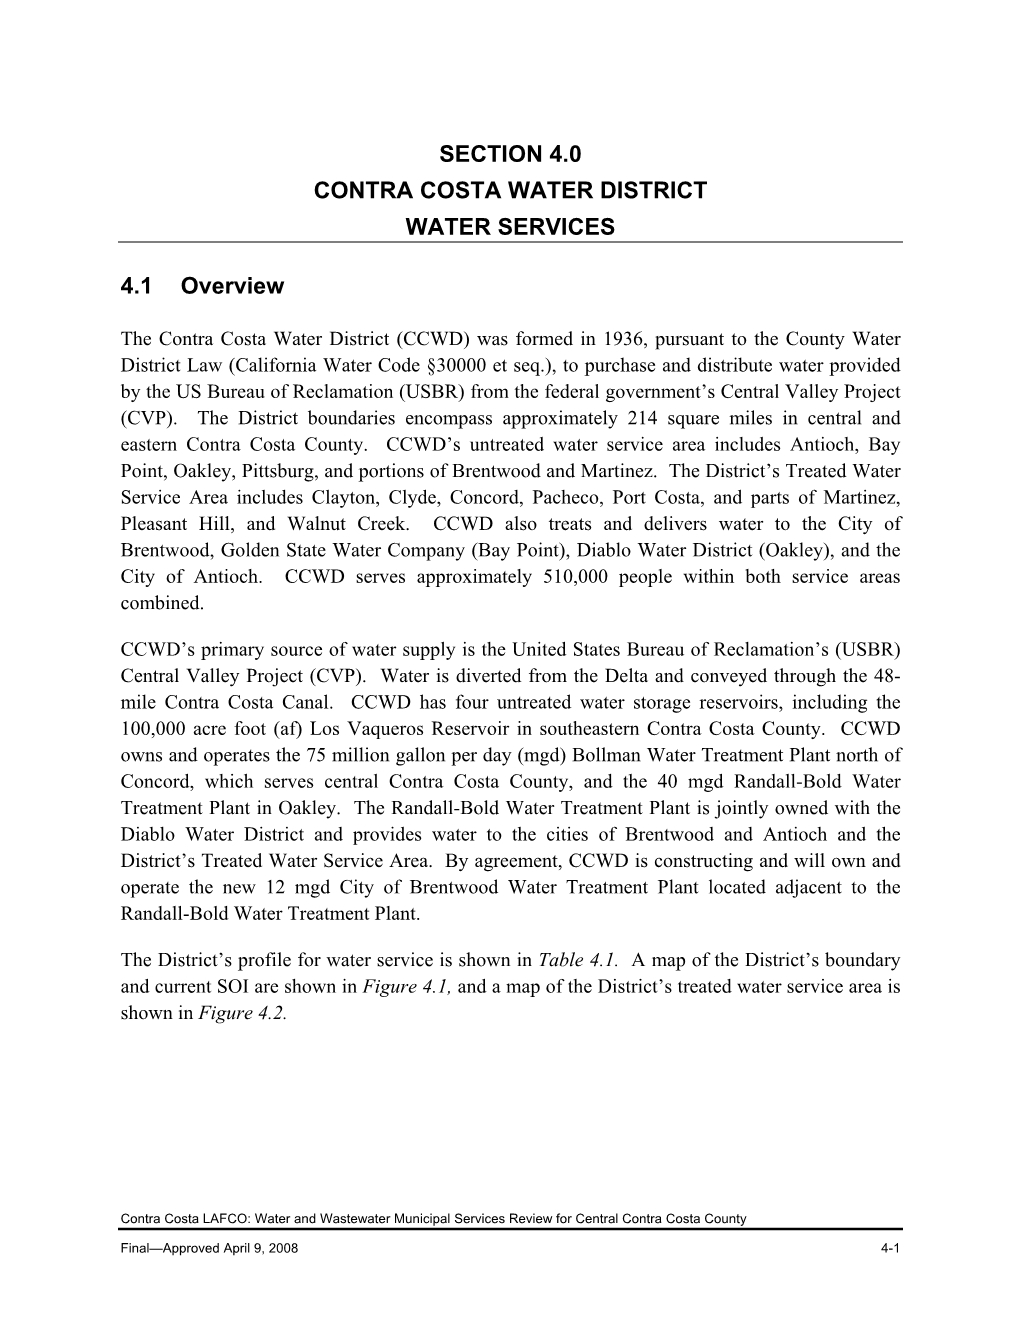 4.0 Contra Costa Water District Water Services